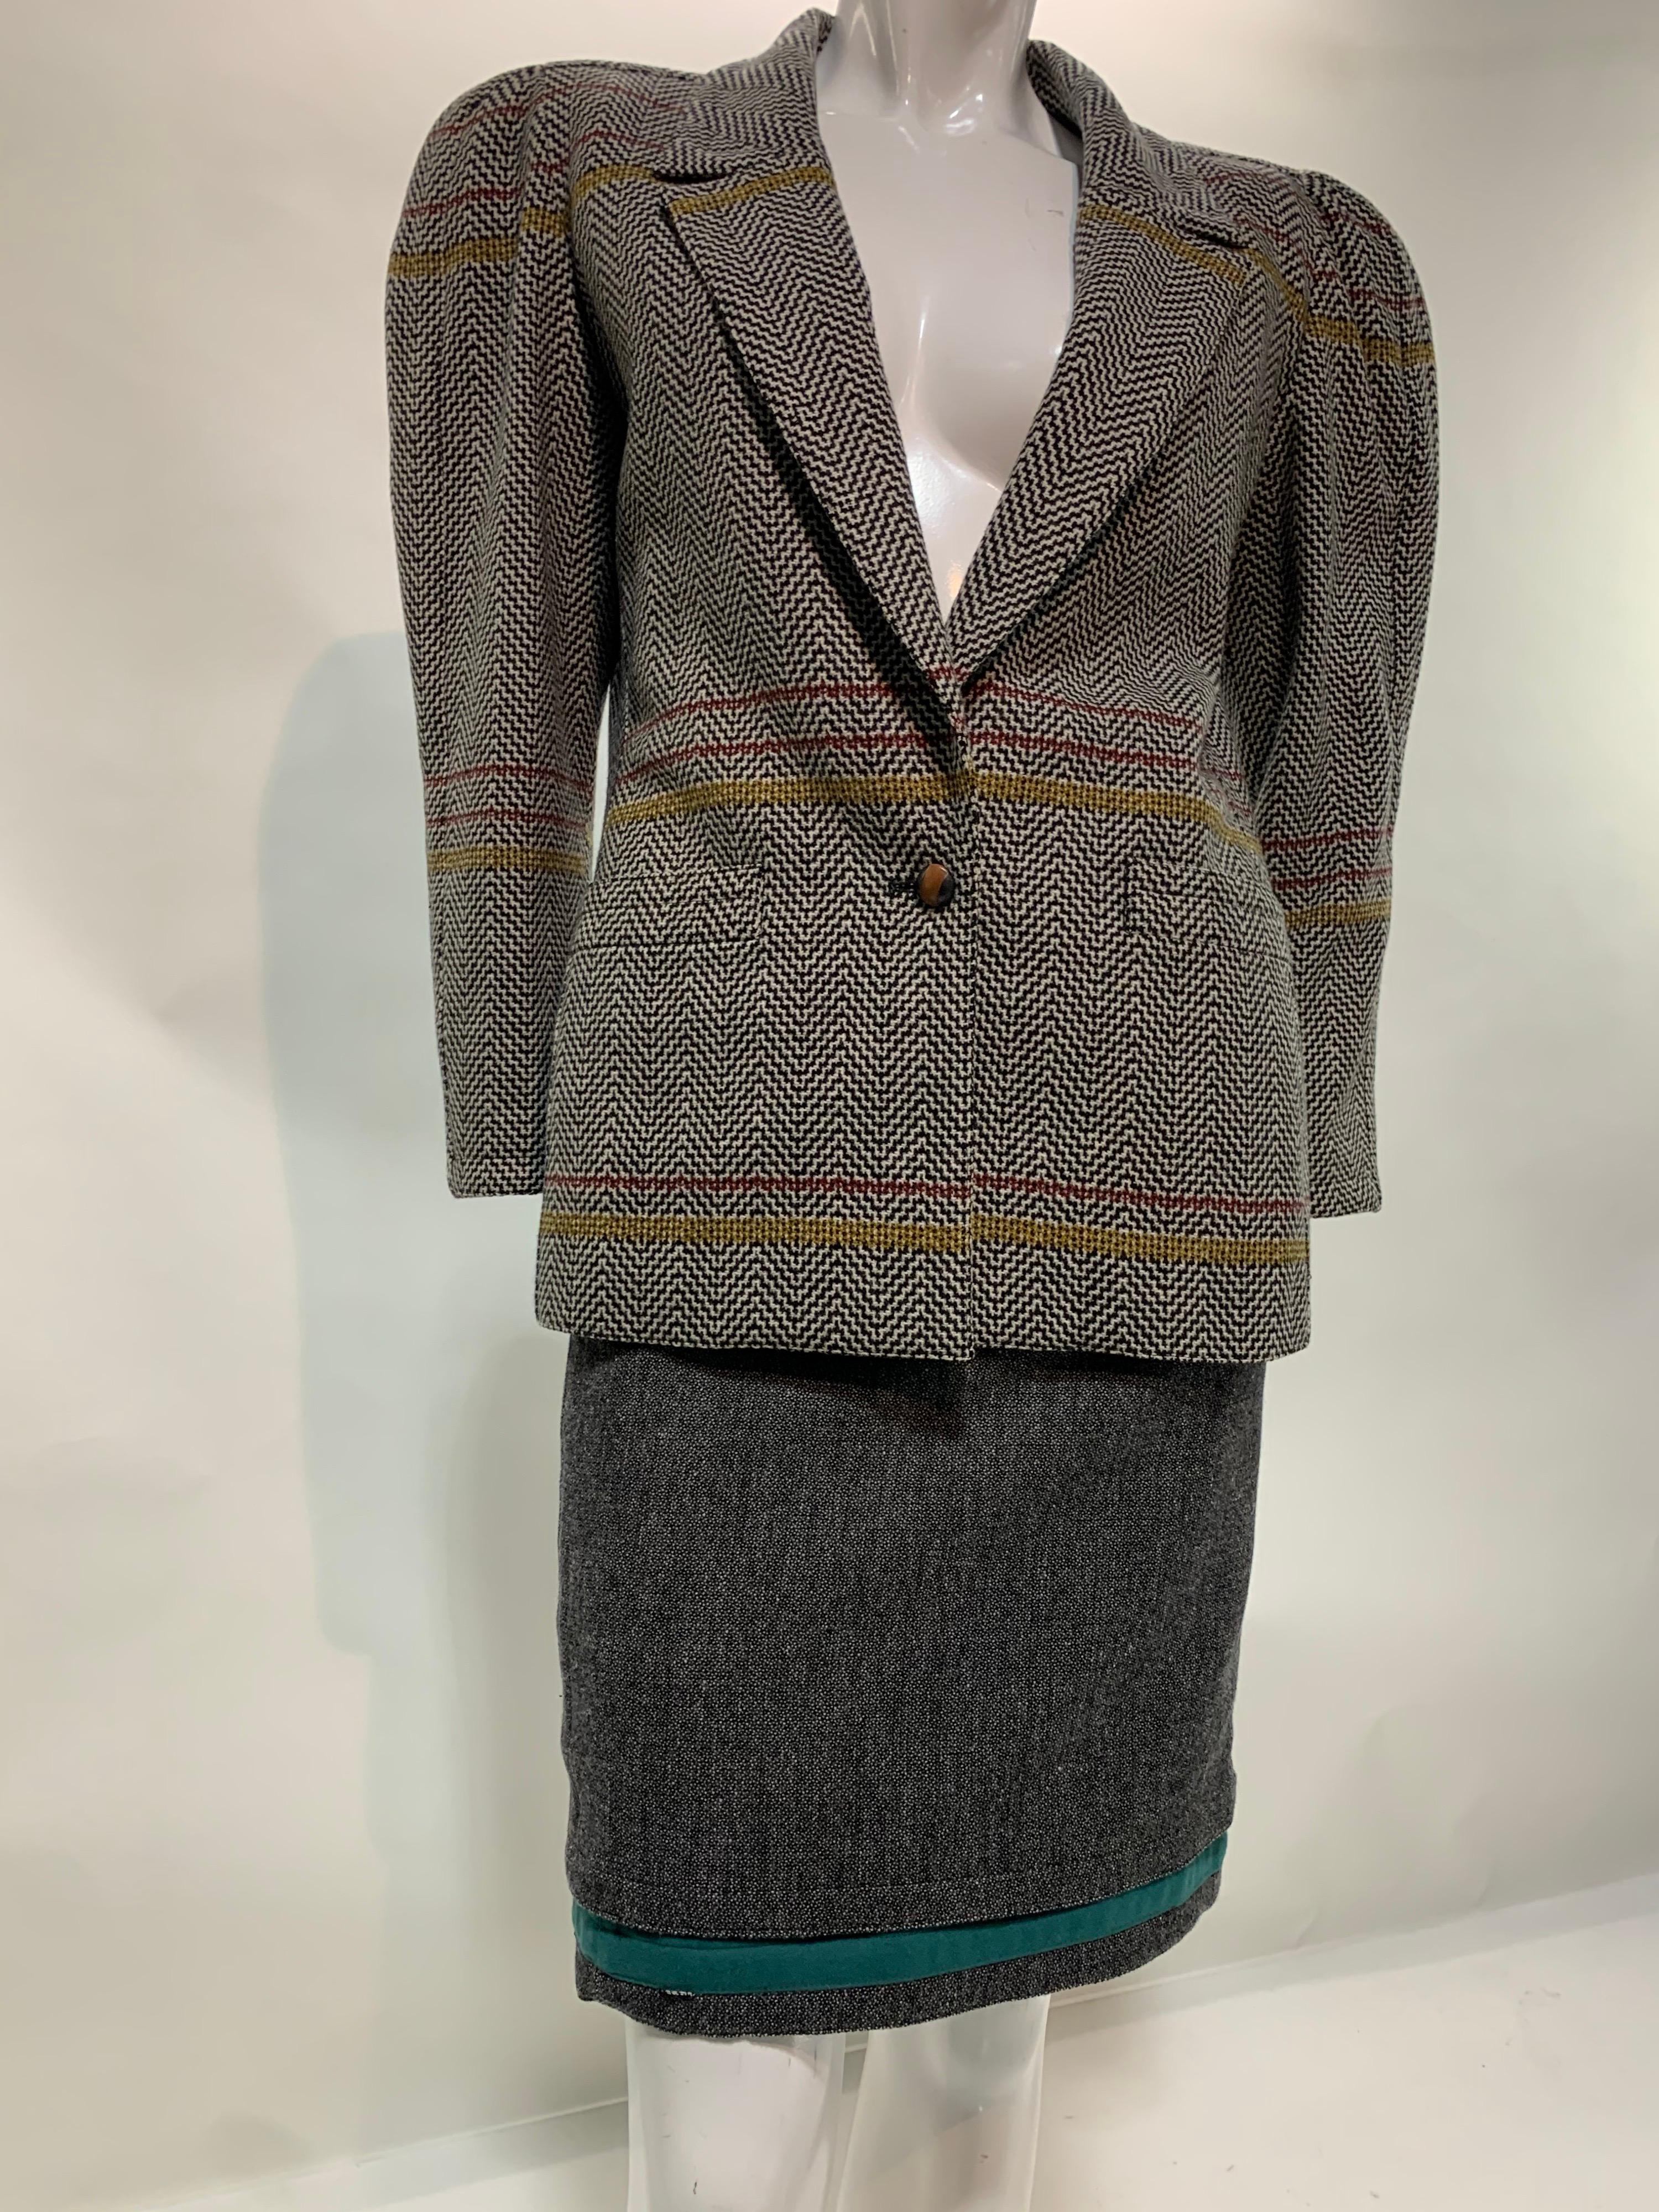 1980 Gianni Versace Mixed Tweed Skirt Suit w/ Structured Shoulder Silhouette For Sale 1